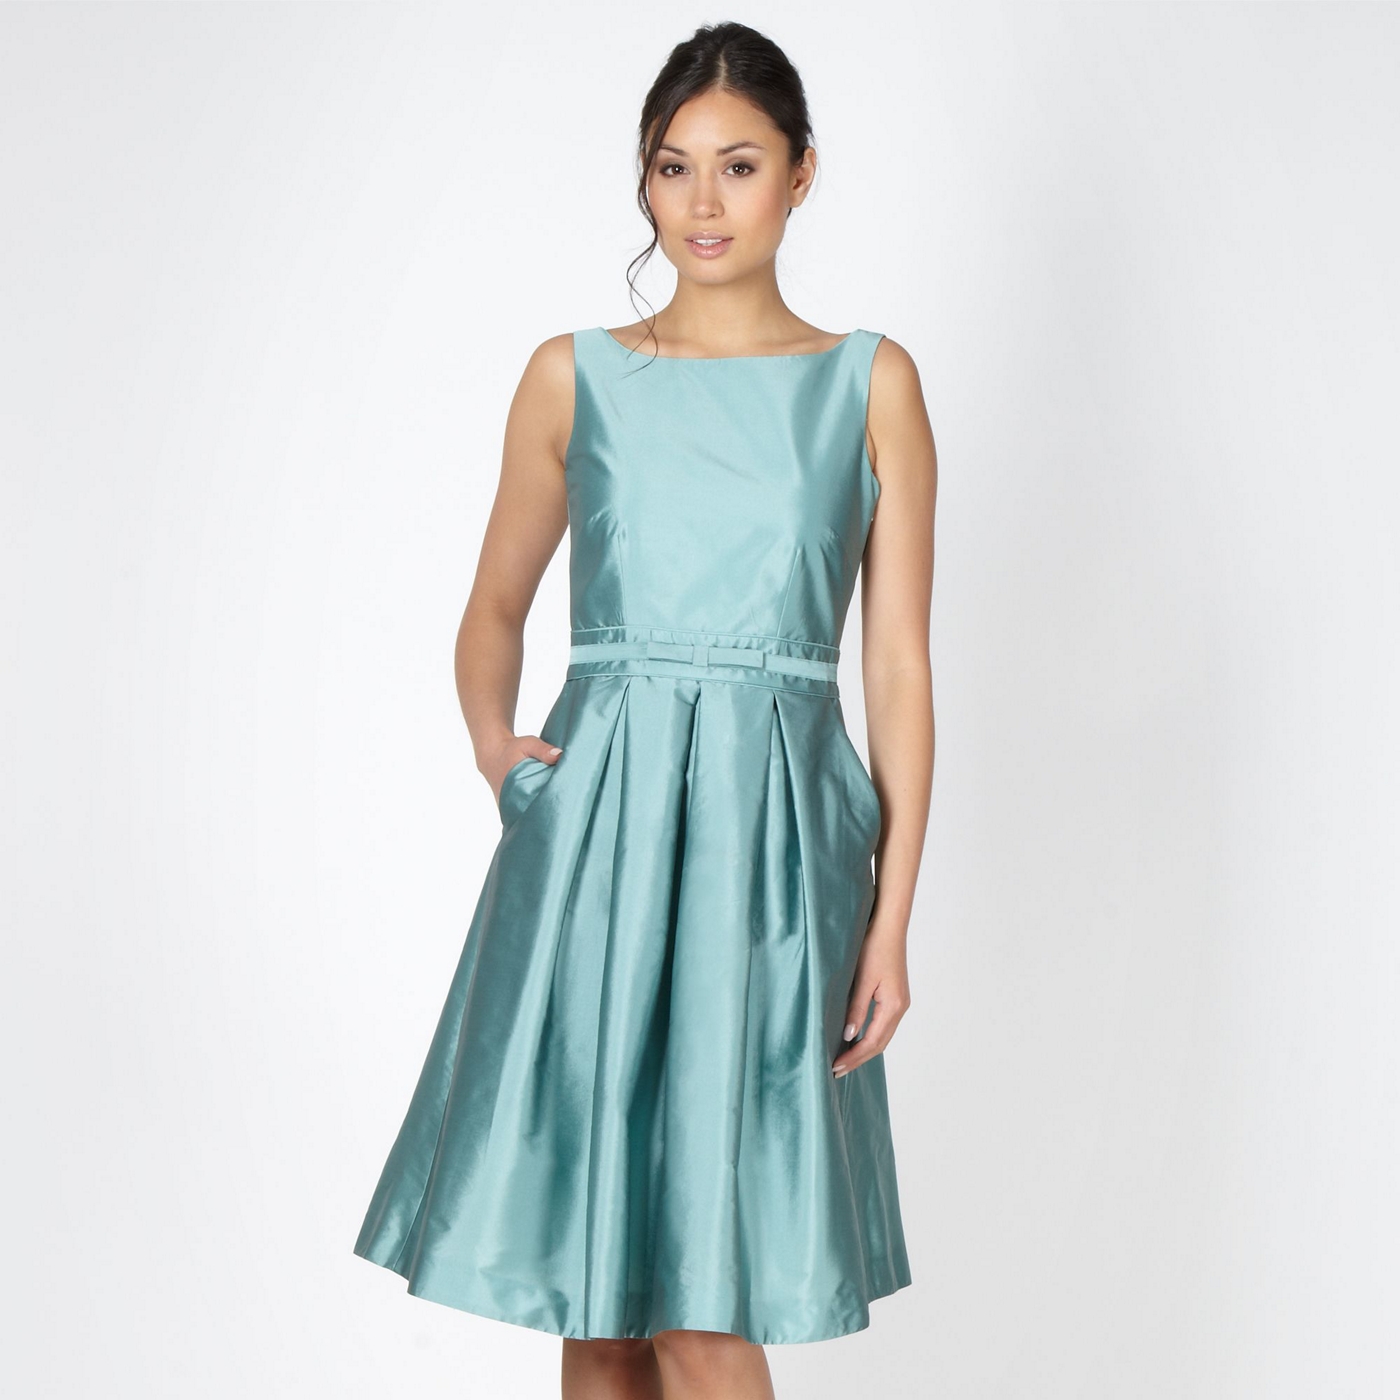 Debut Online exclusive pale green bow trimmed prom dress